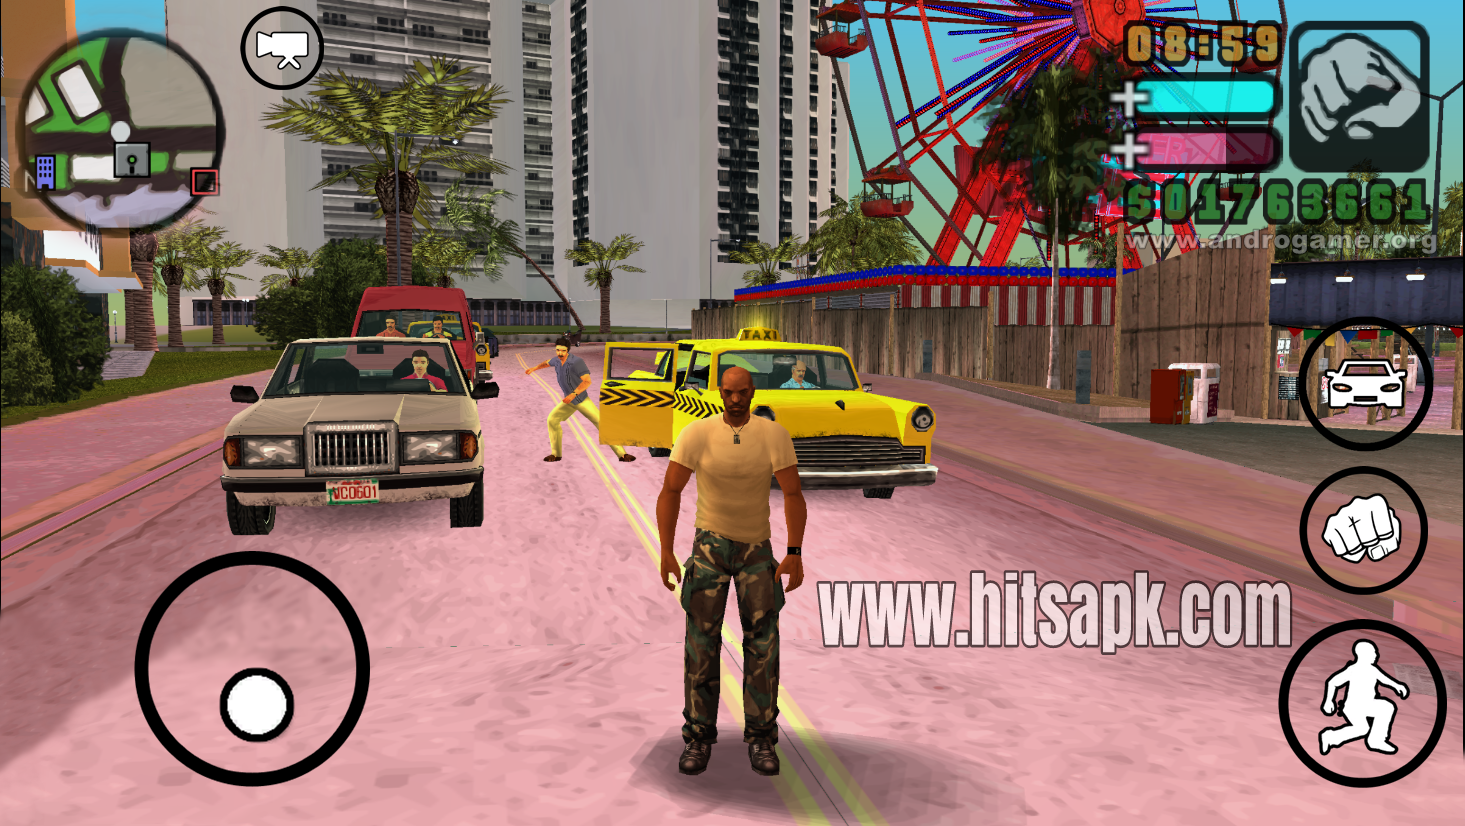 Grand Theft Auto Gta Vice City Level 4 Free Download Game